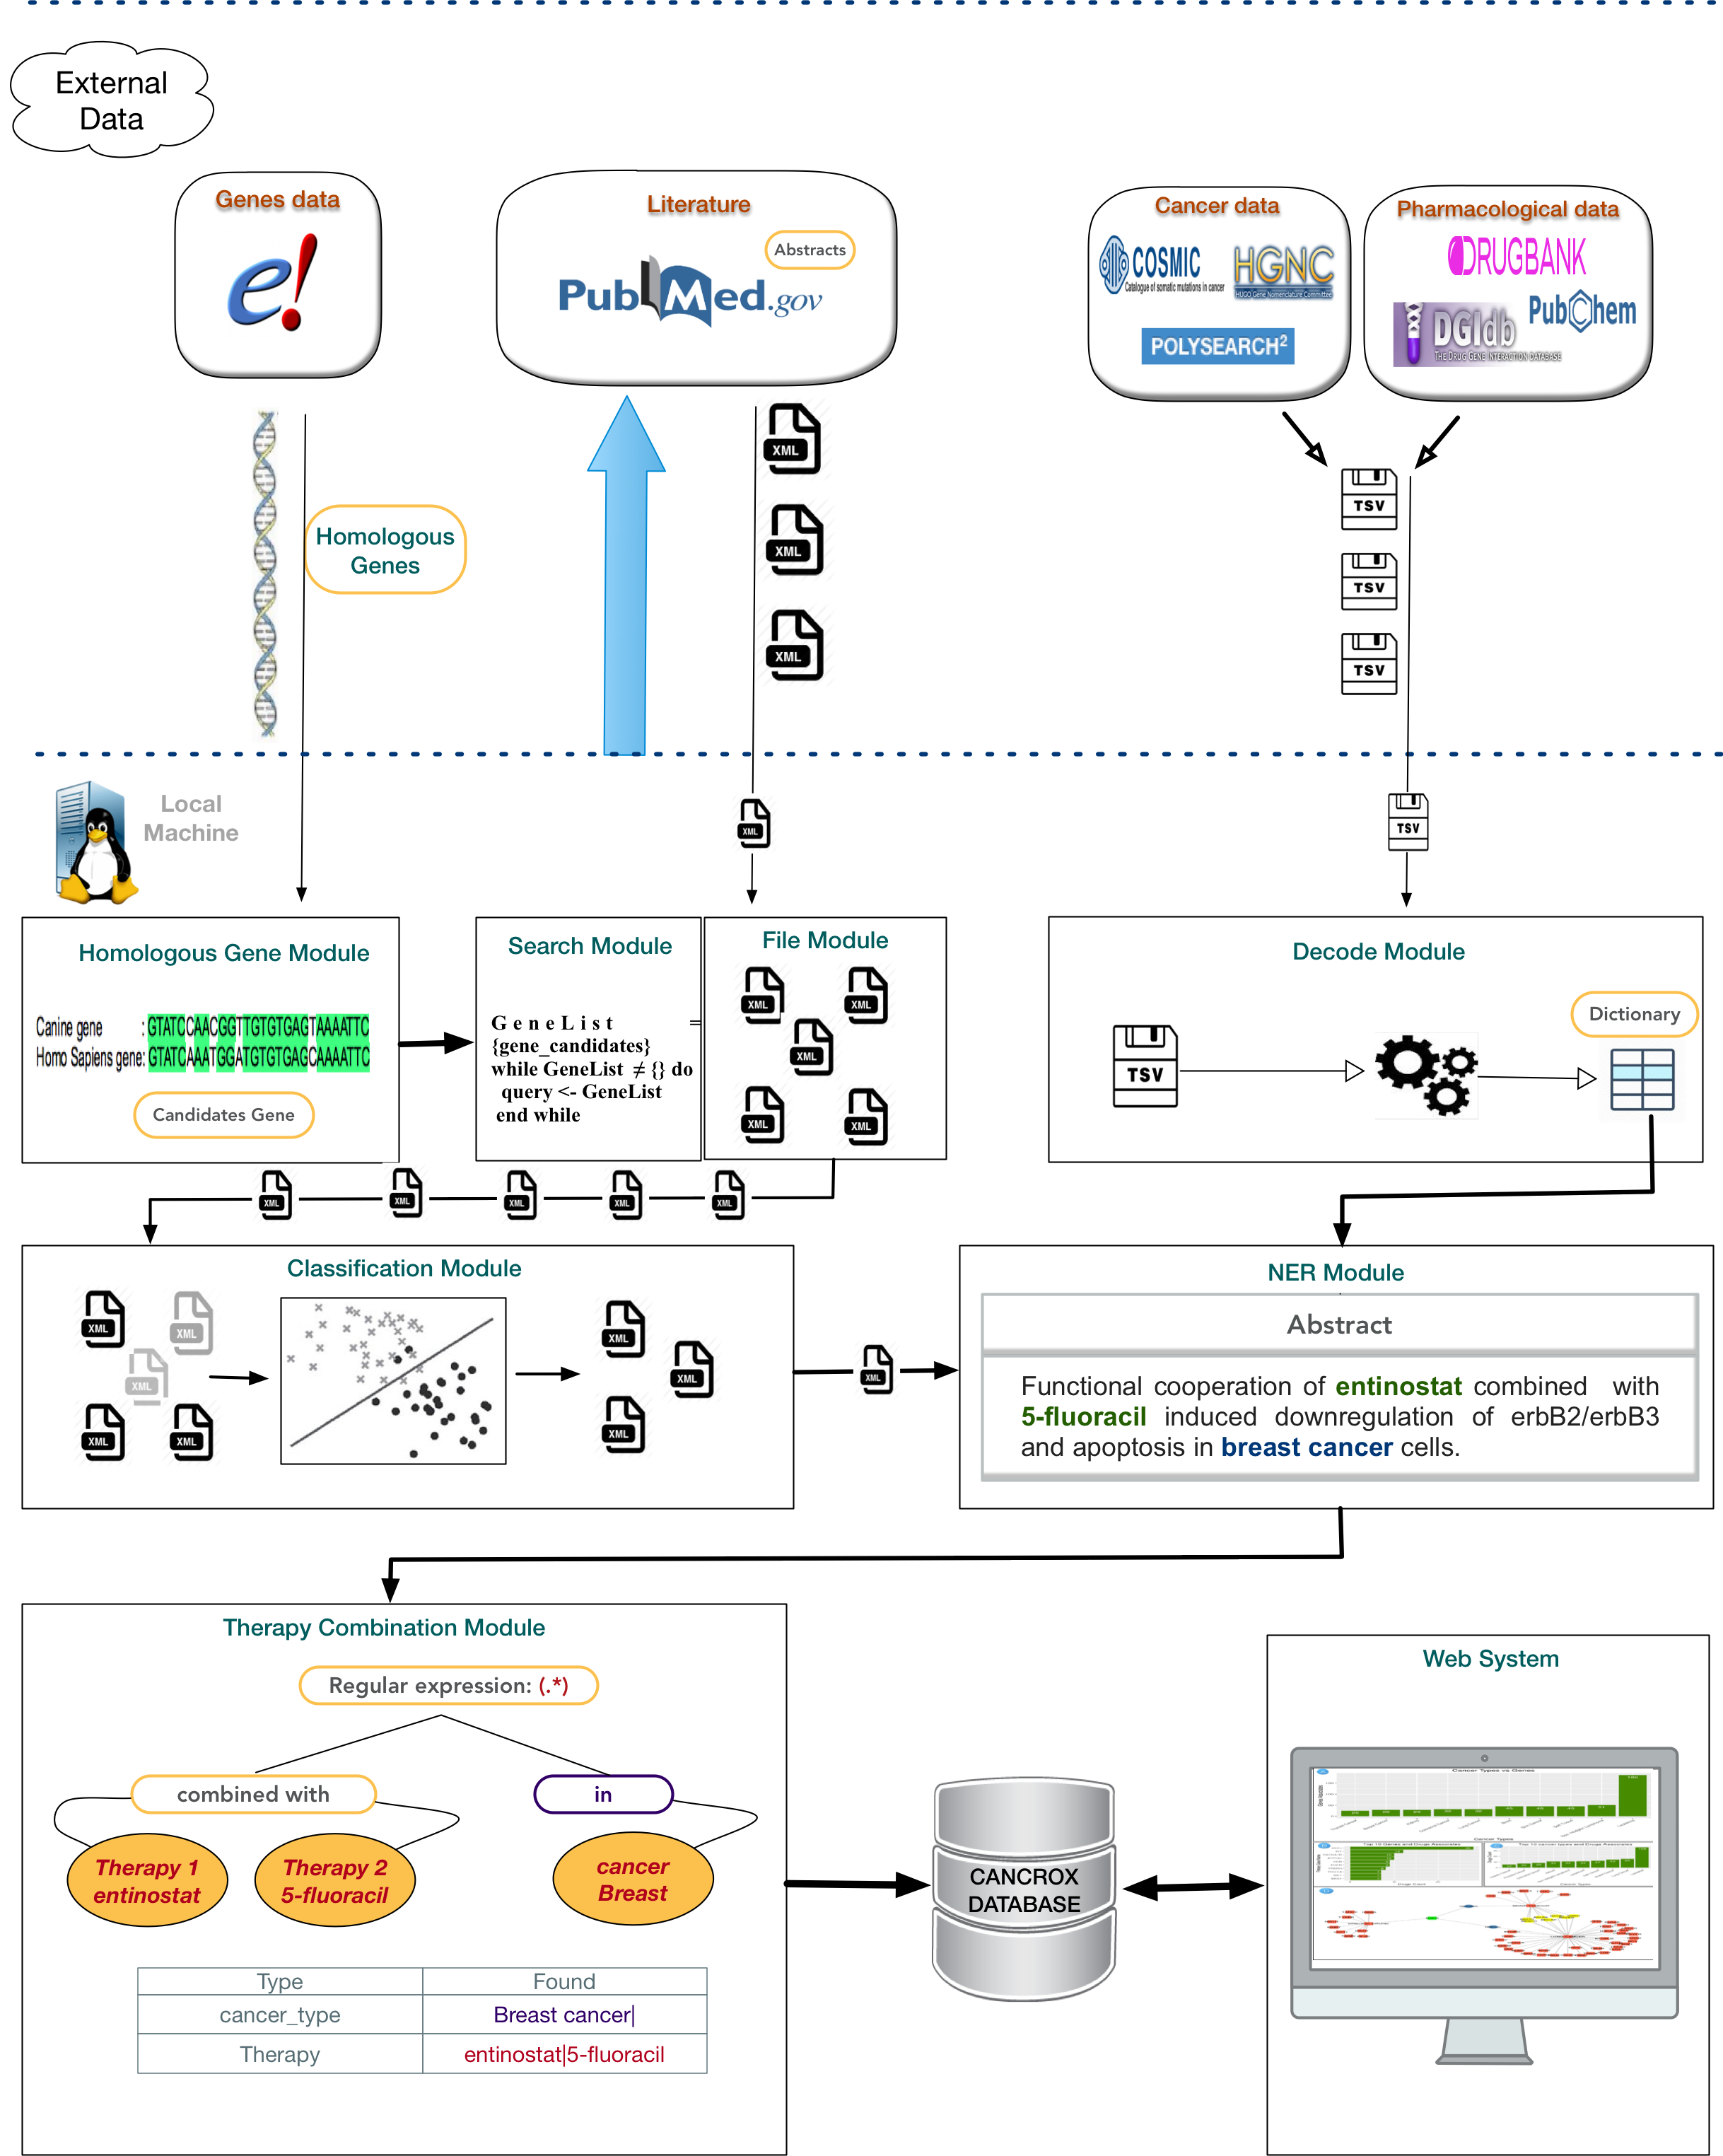 Architecture of the CANCROX database.